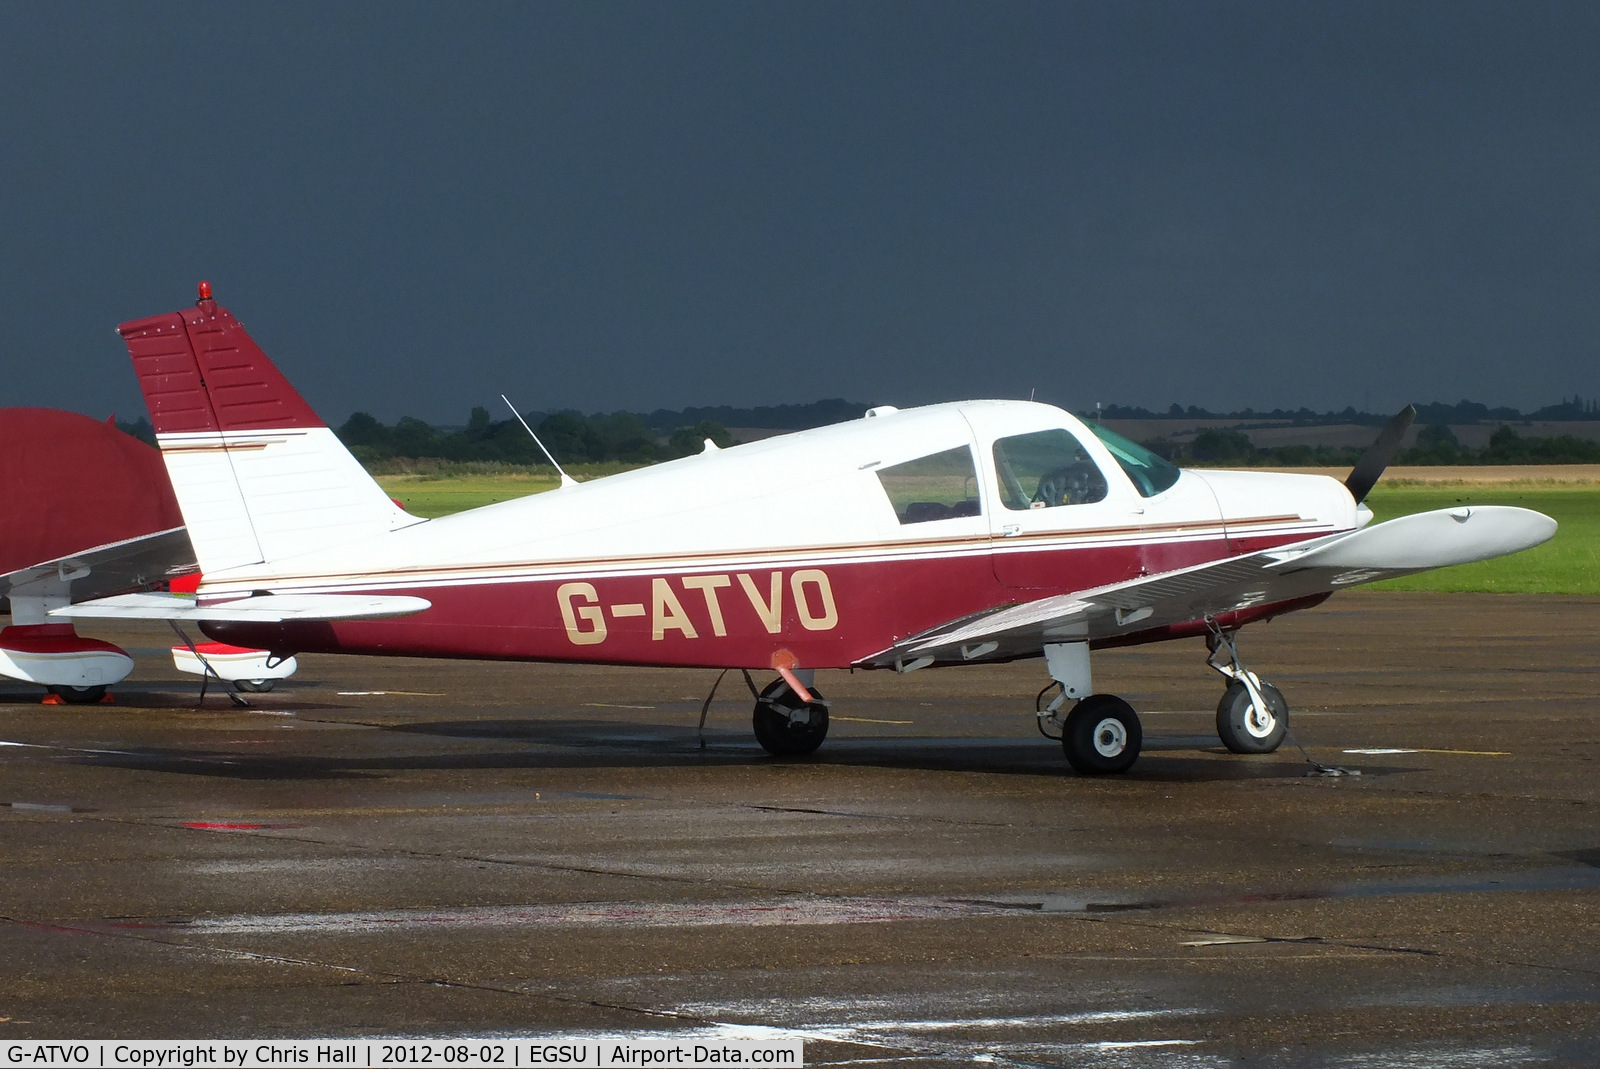 G-ATVO, 1966 Piper PA-28-140 Cherokee C/N 28-22020, on the apron at Duxford